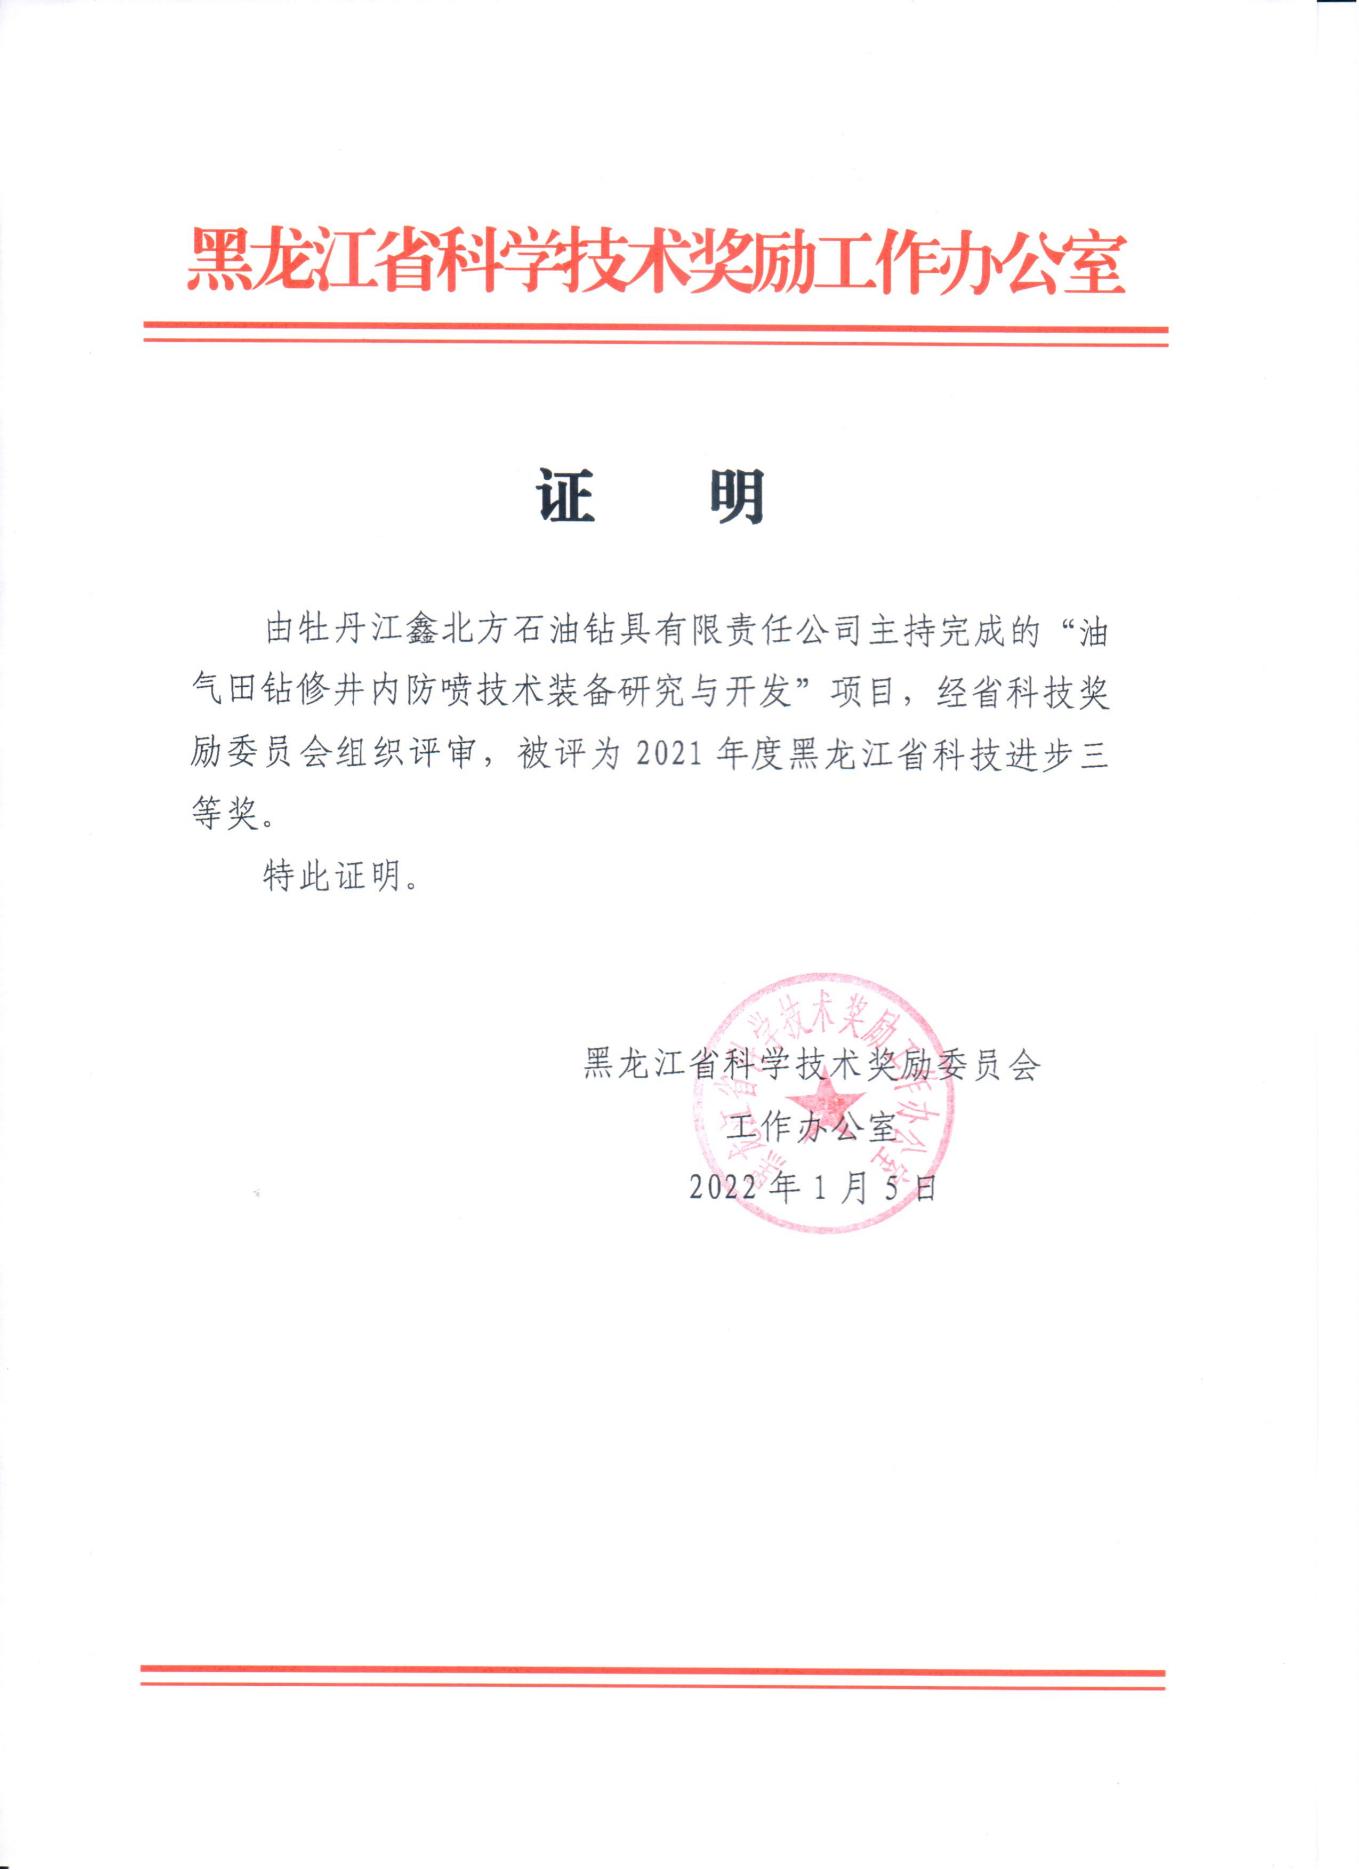 Our company won the third prize of Heilongjiang Provincial Science and Technology Award.